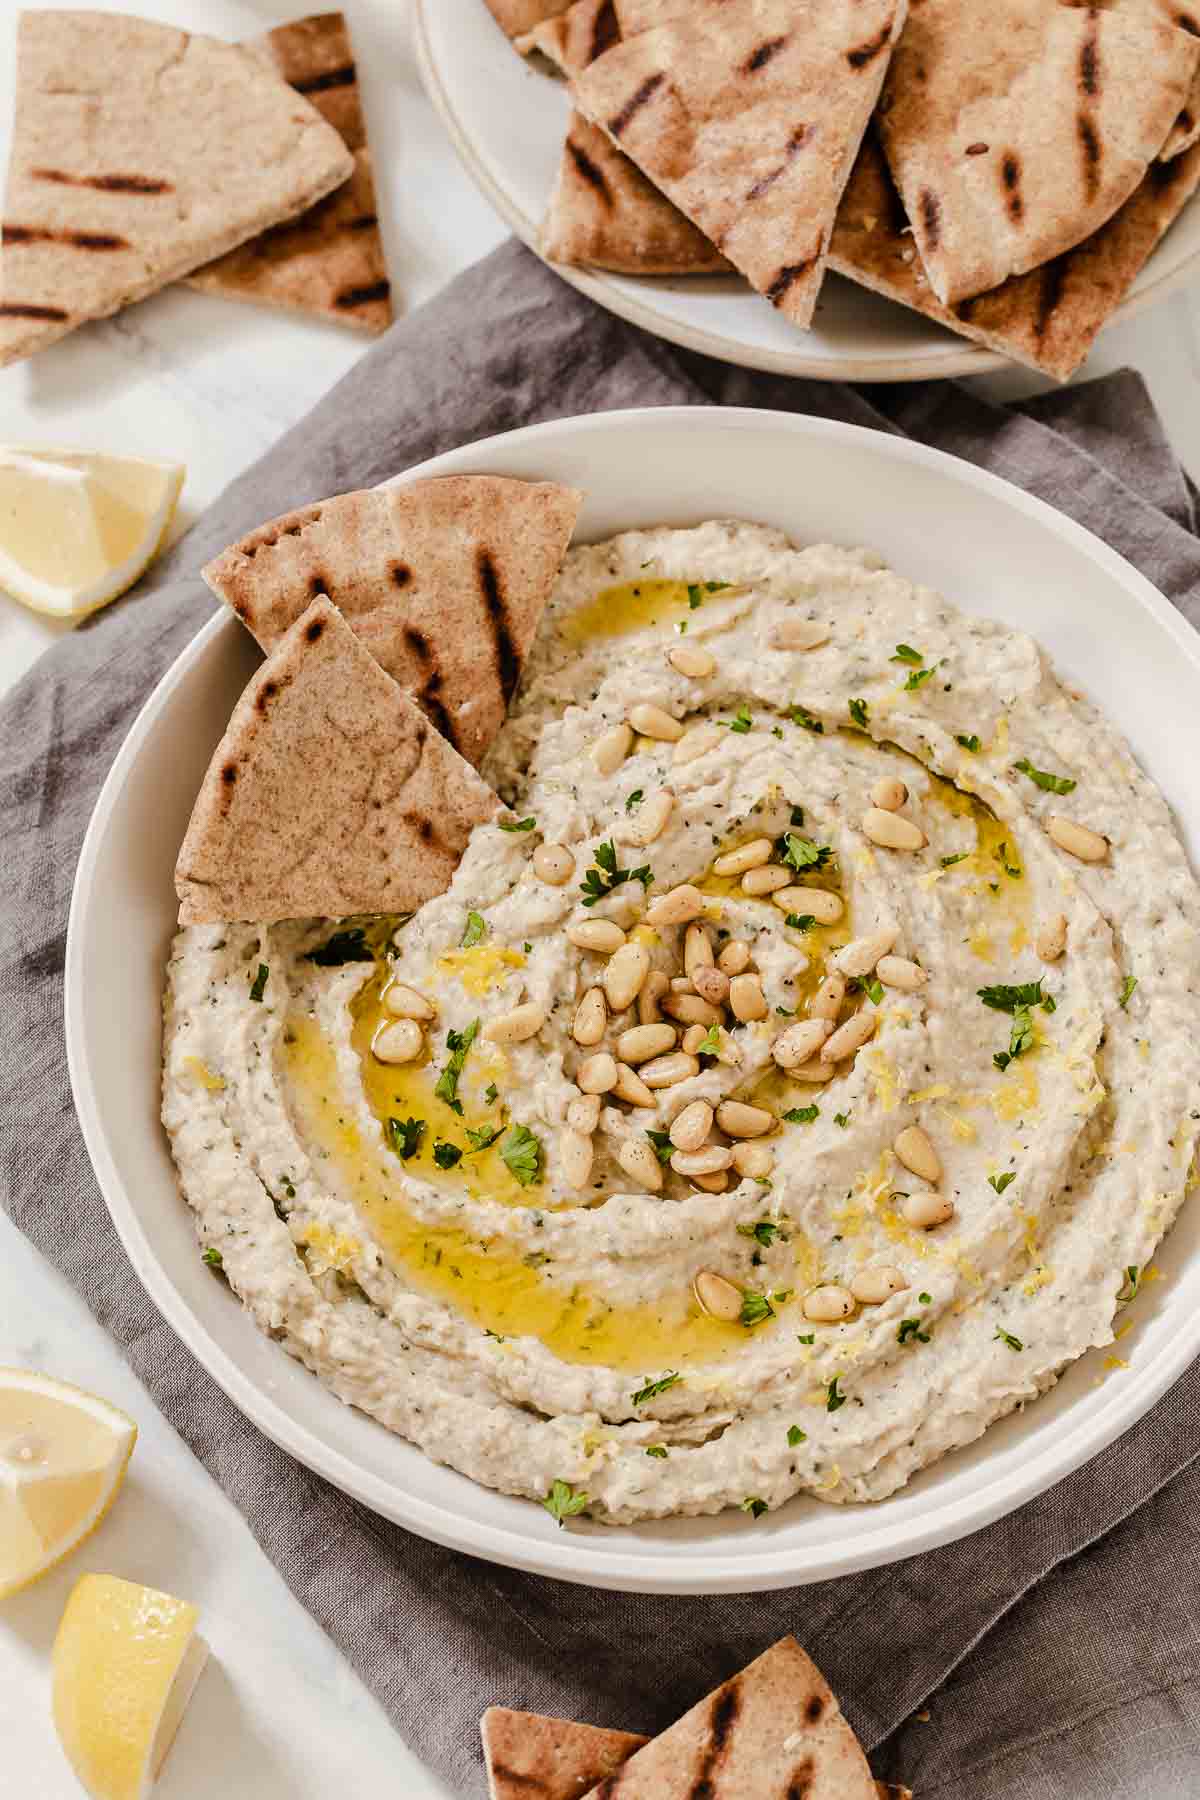 Bowl of white bean eggplant dip with herbs, pine nuts and pita triangles on side.